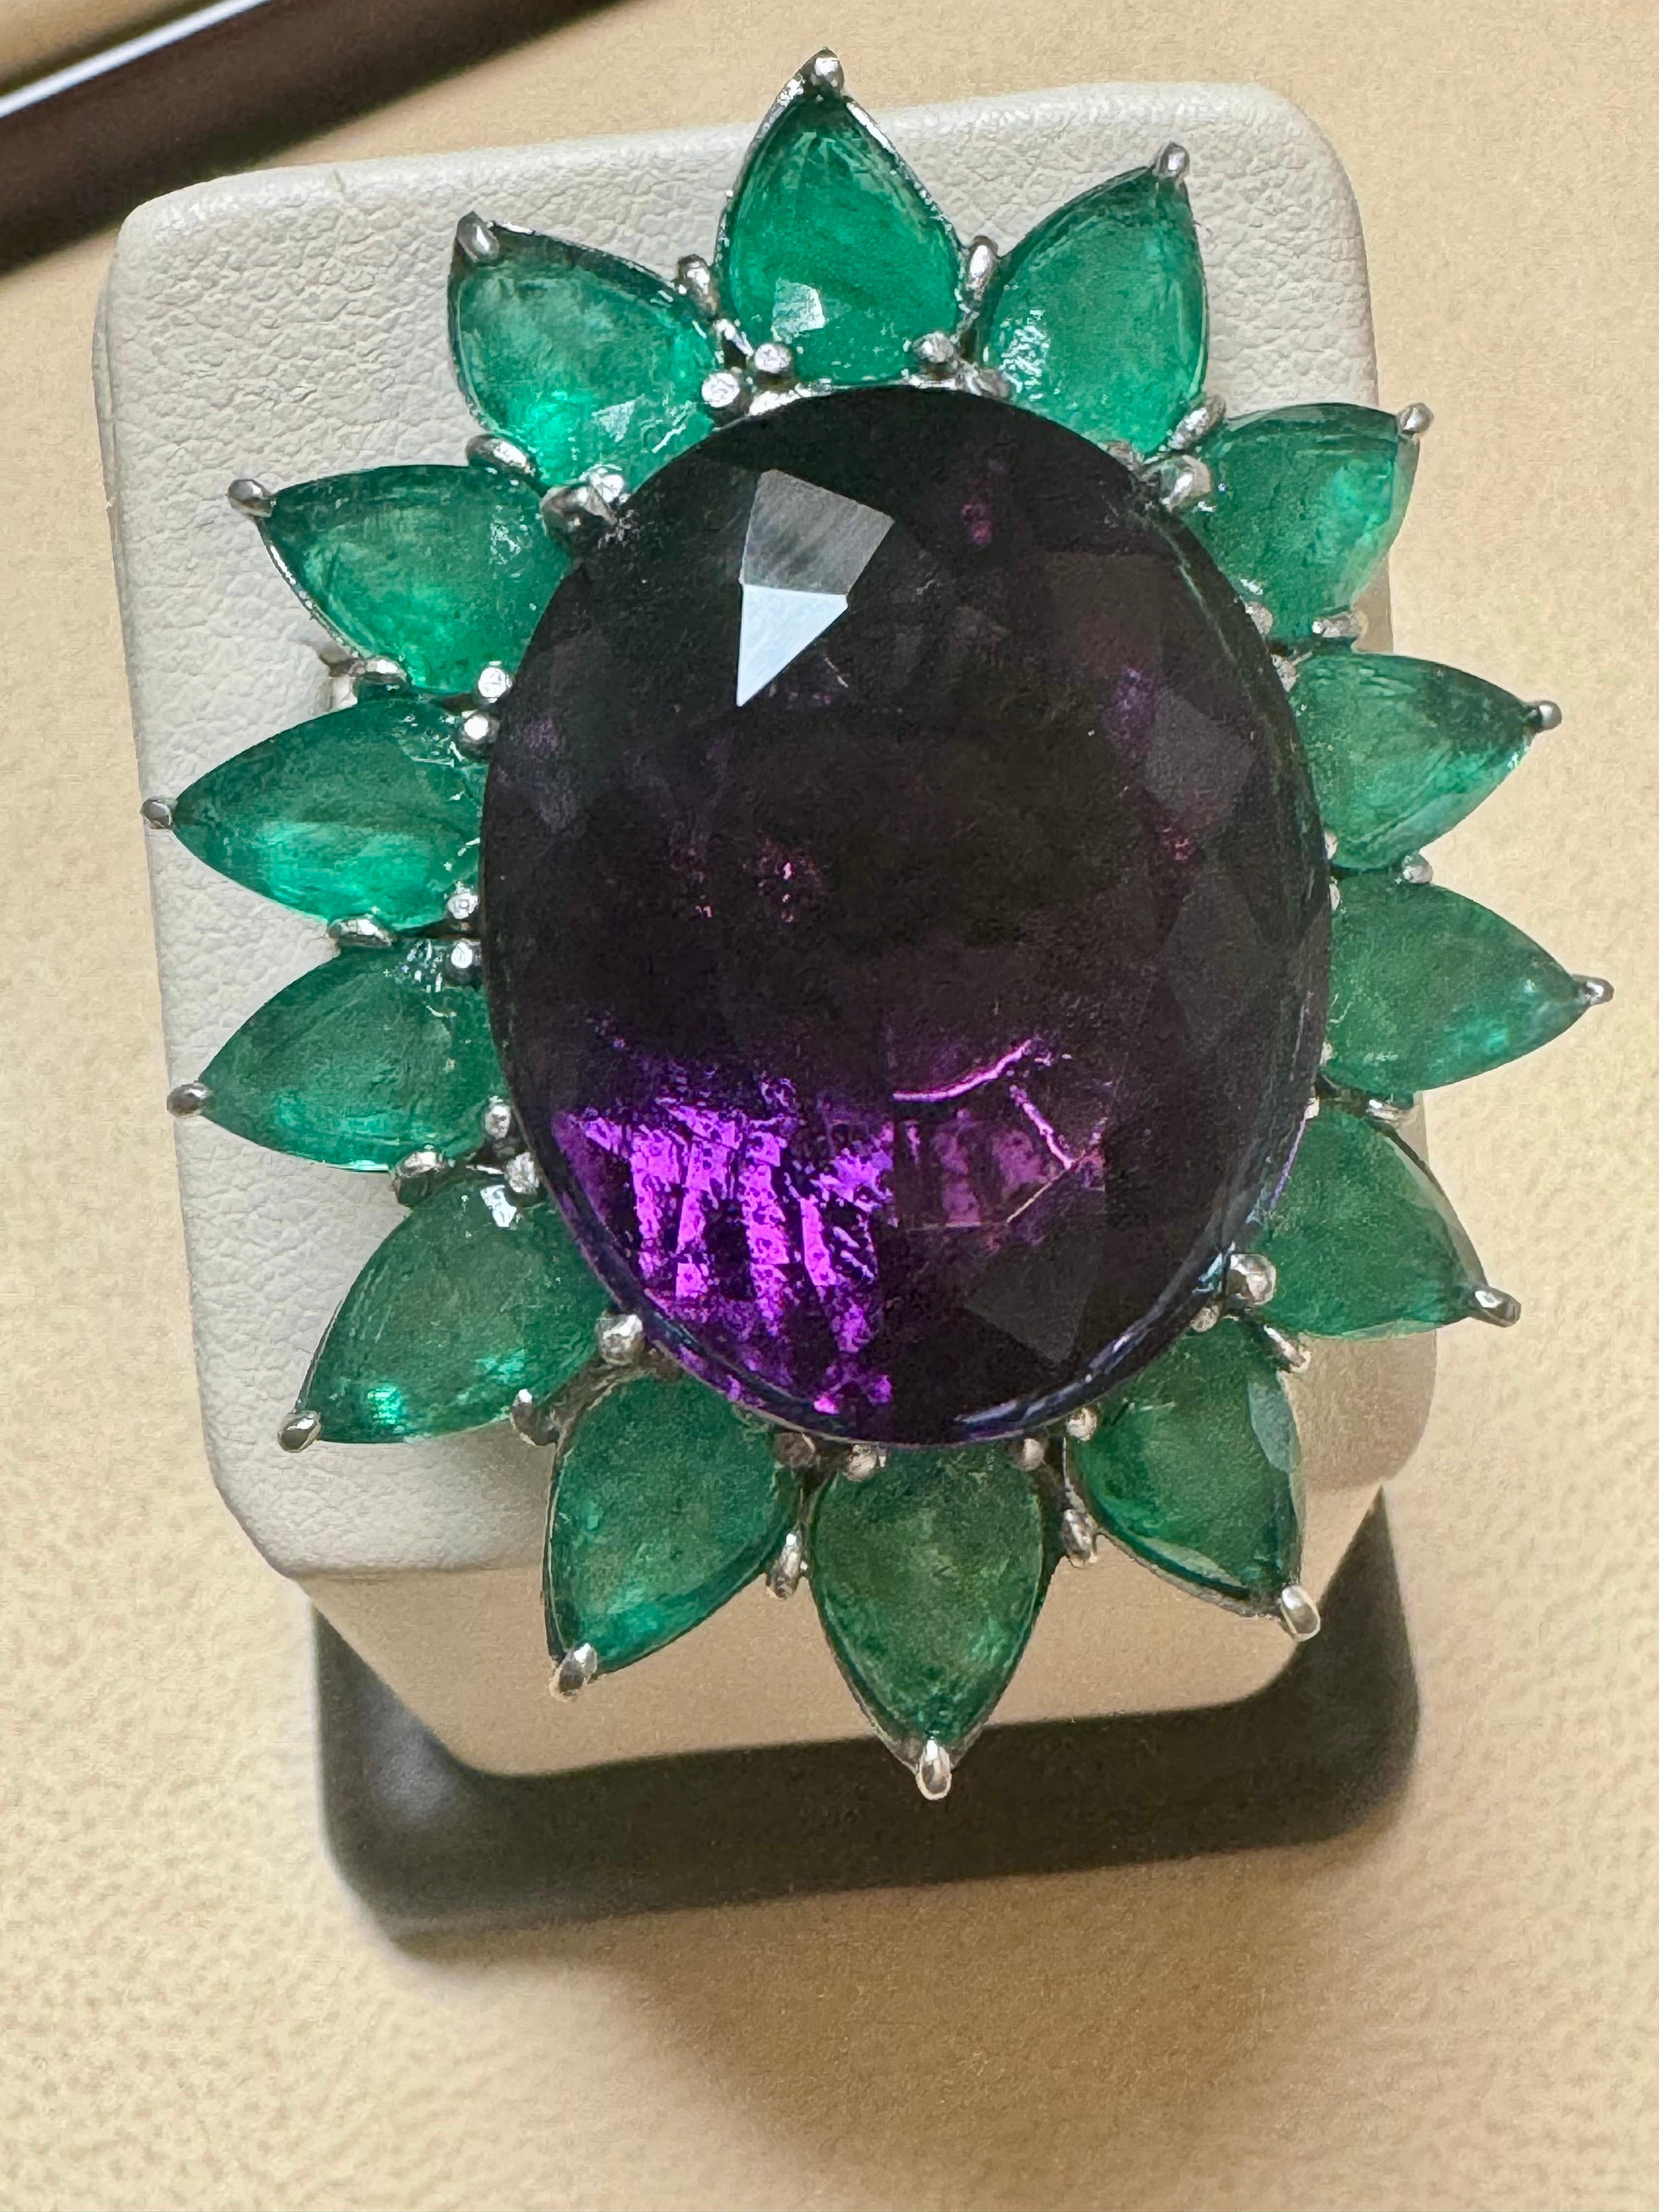 Approximately 30 Ct Oval Amethyst & 25 Ct Emerald Large Cocktail Ring in Platinum, 32 gm, Size 6. This beautiful cocktail ring features a large, high-quality oval amethyst weighing around 30 carats, boasting exceptional color and clarity in a